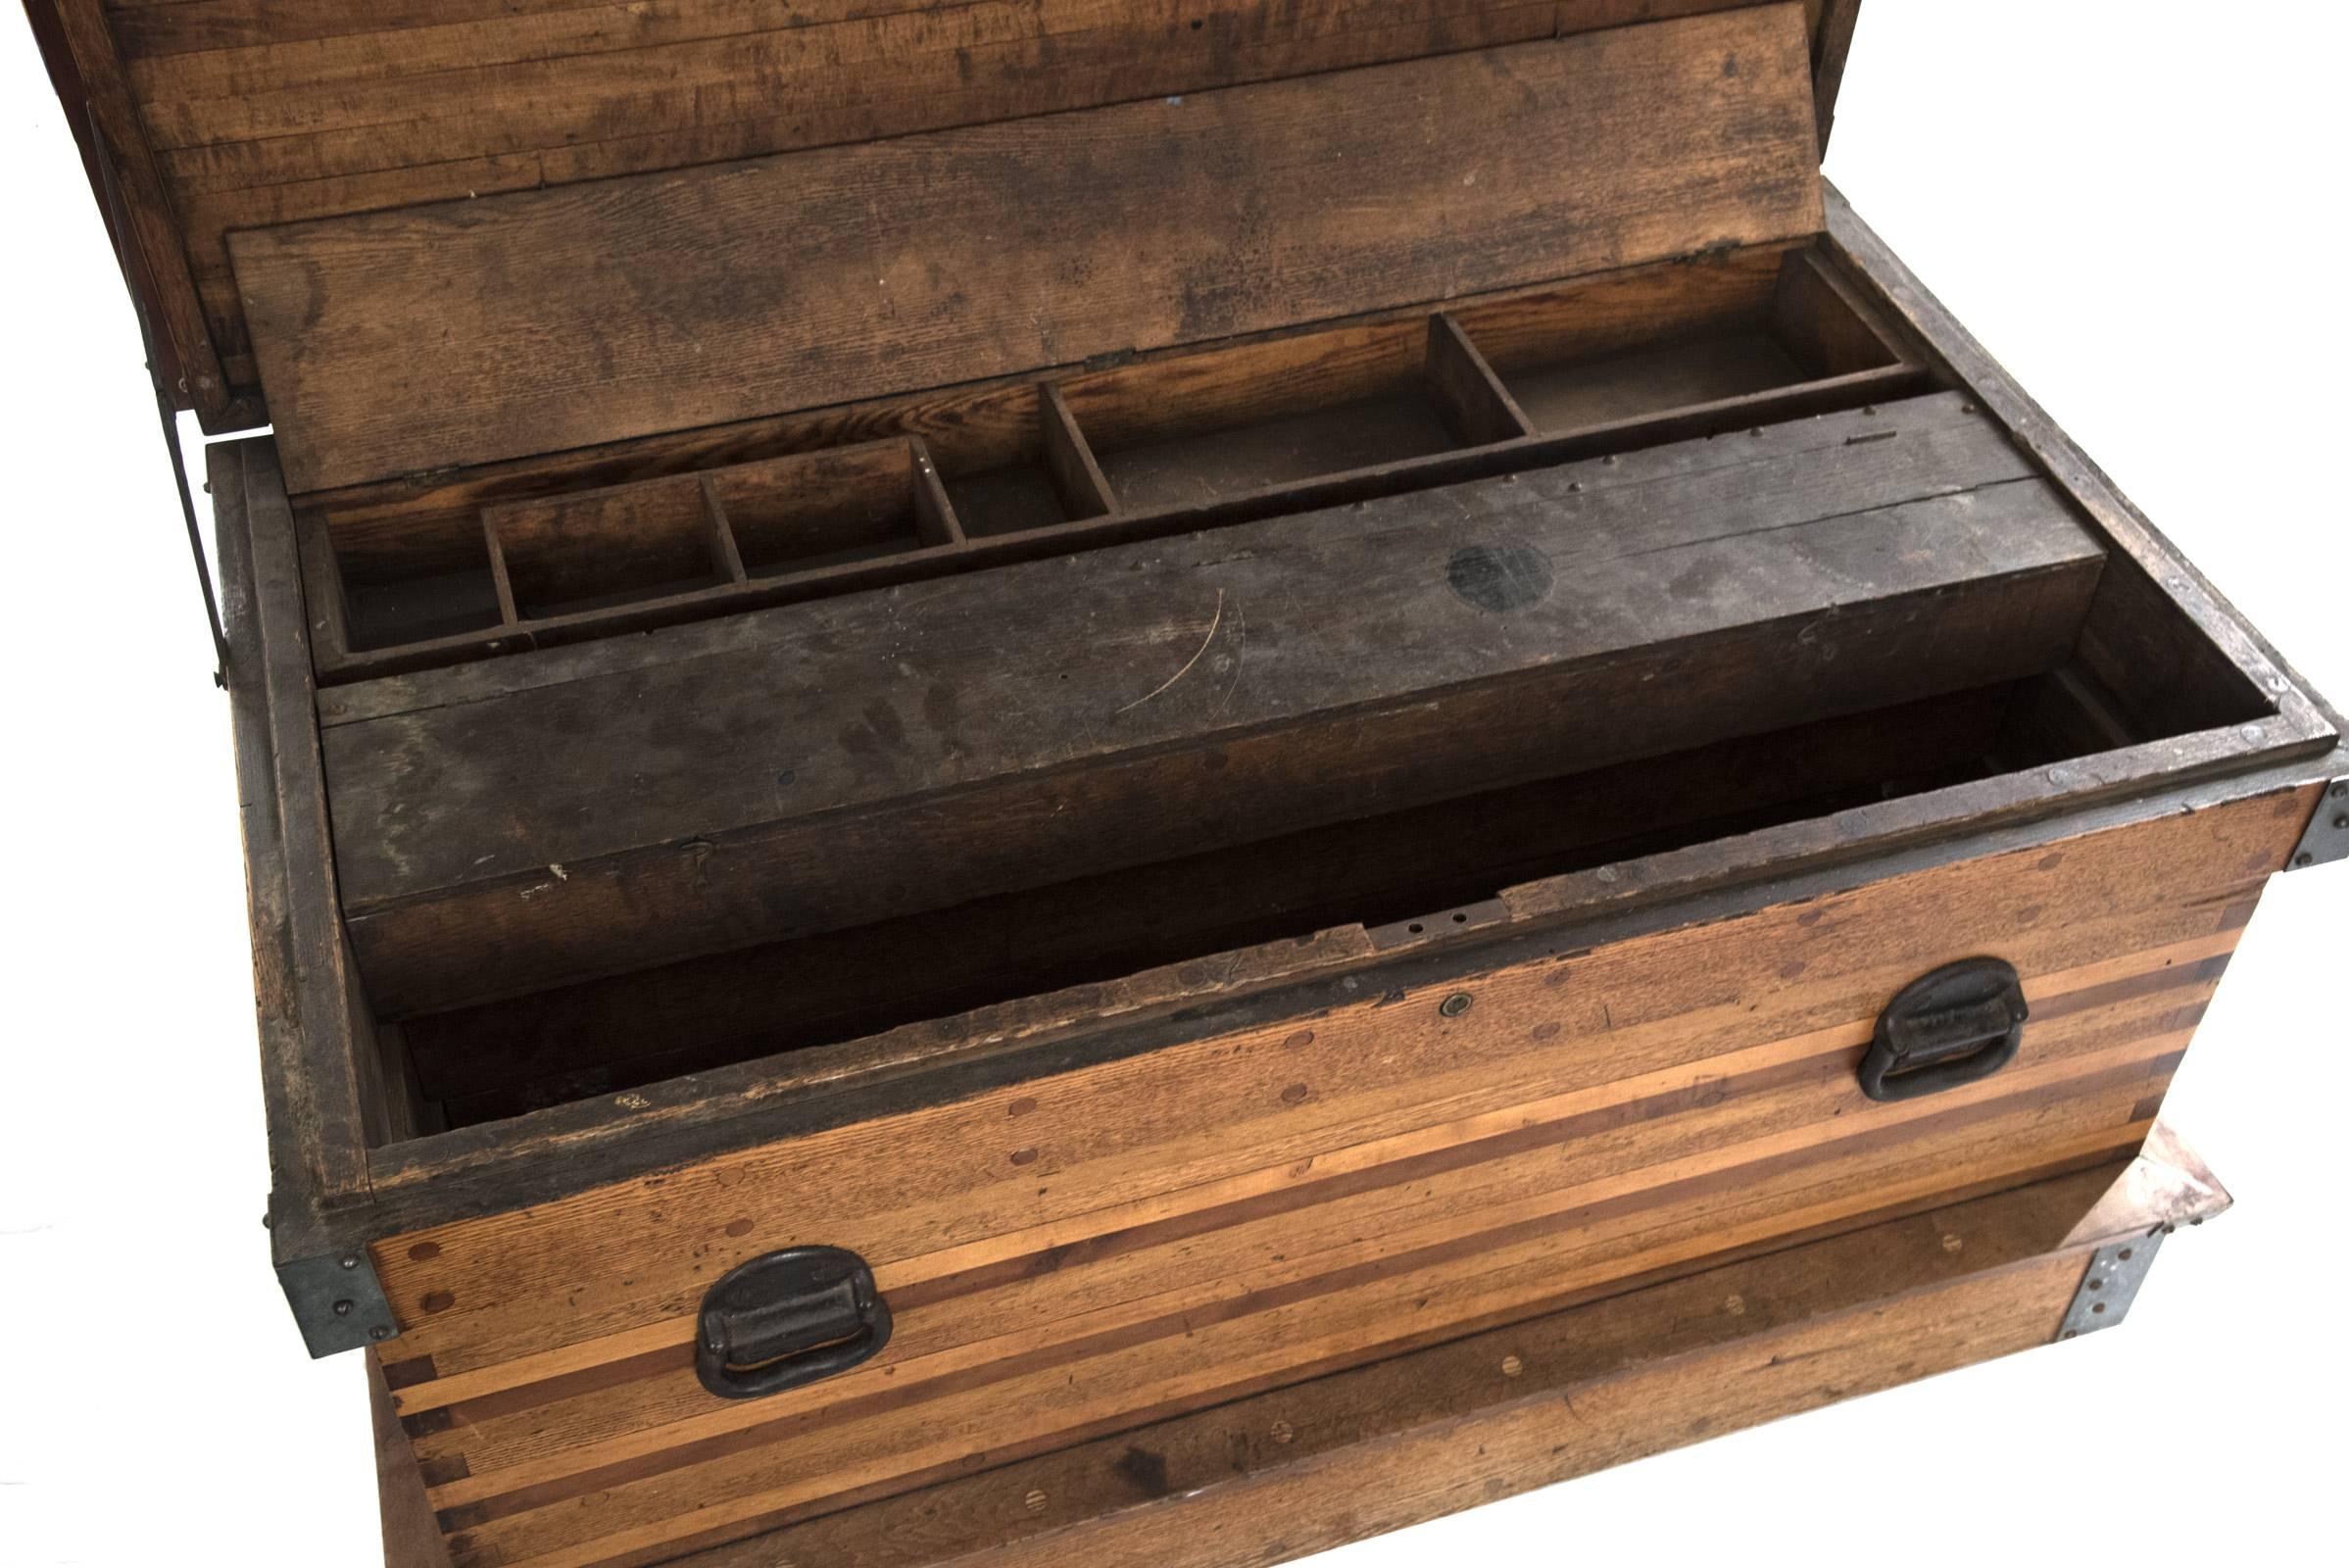 An early 20th century cabinet maker's tool chest constructed of alternating bands of different woods with half lap corners and some steel corner brackets for reinforcement, all sides mounted with iron handles and raised on a wider kick-board base.